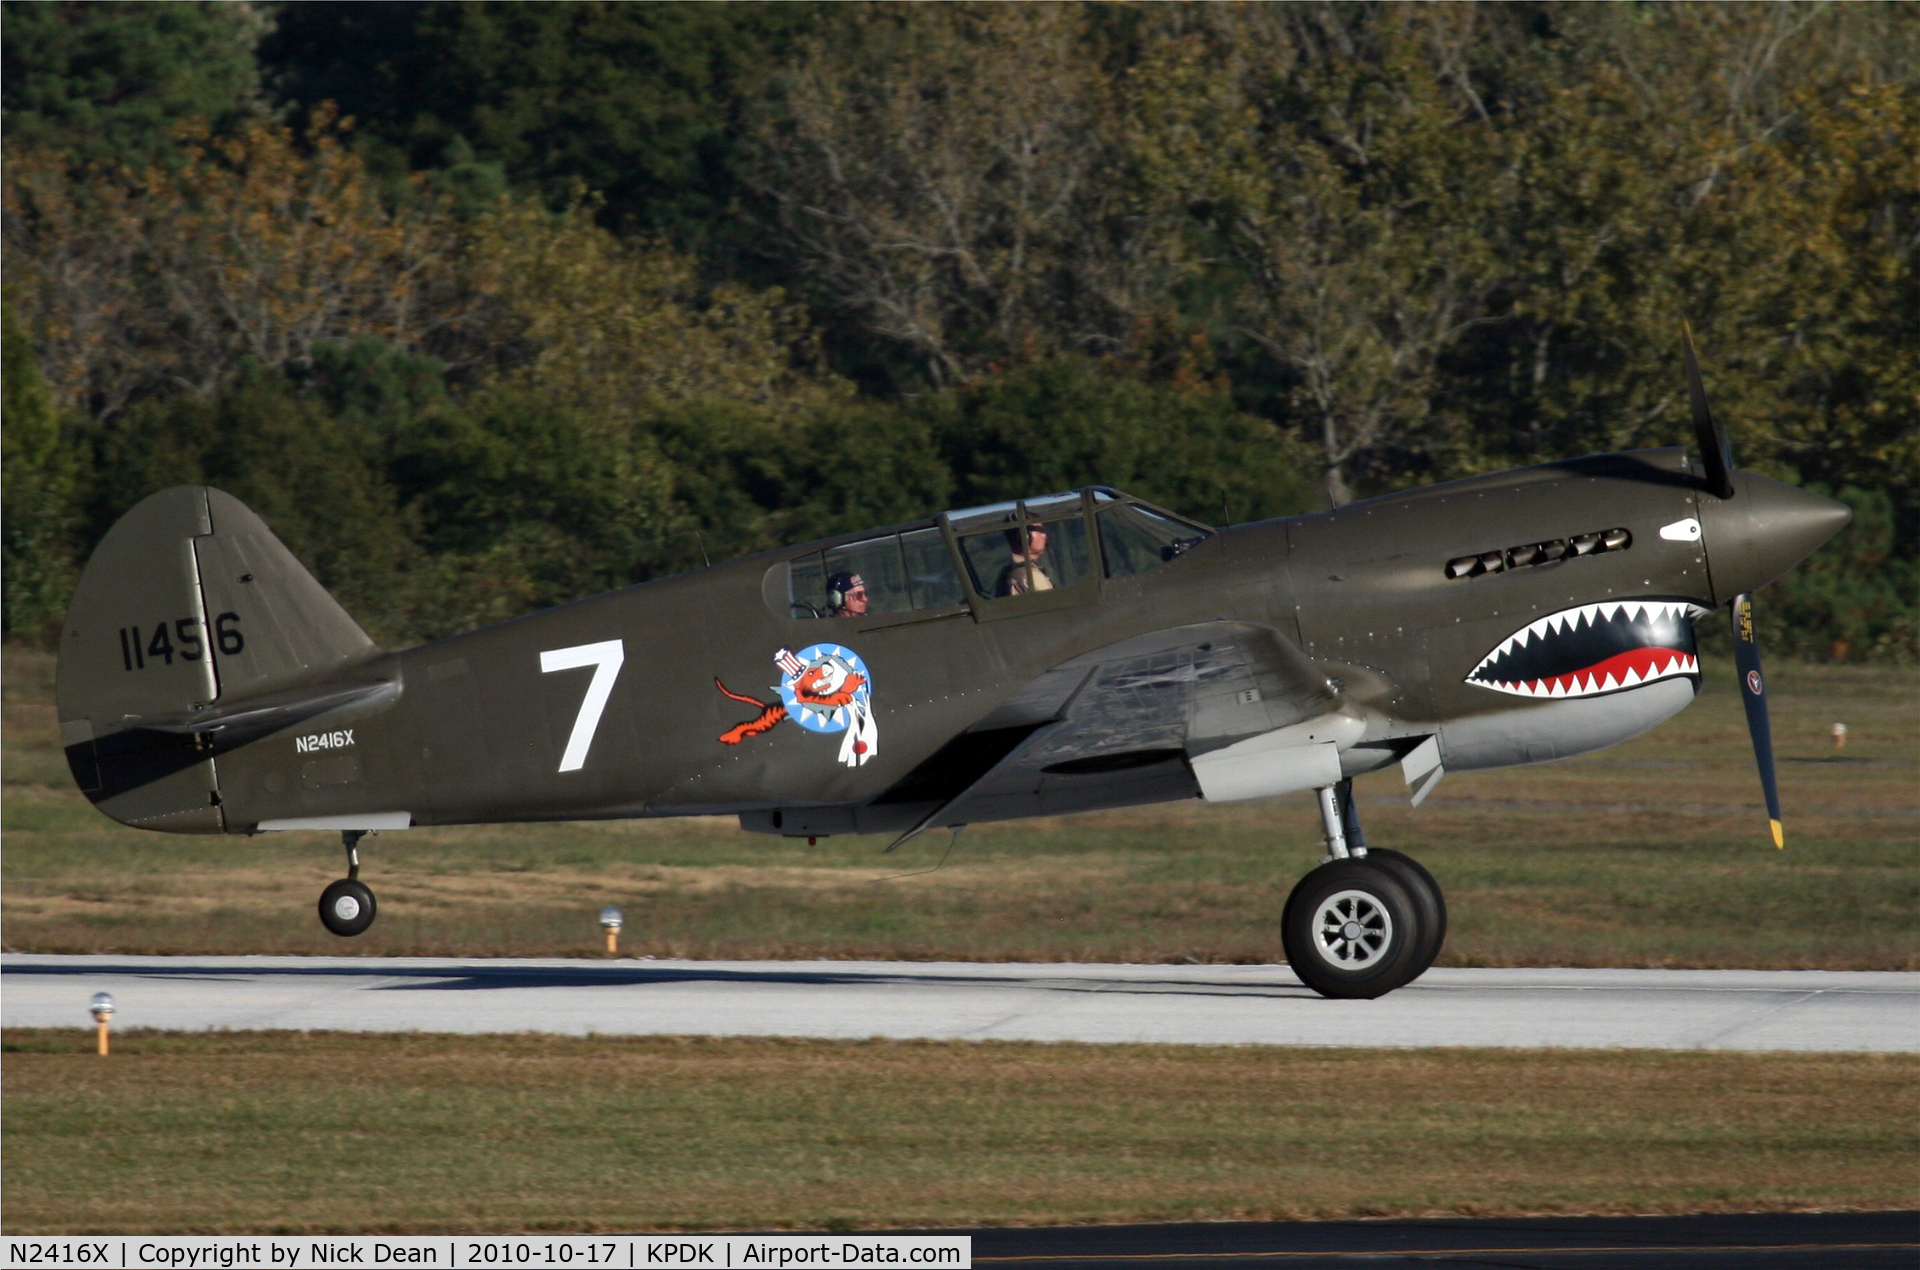 N2416X, Curtiss P-40E Warhawk C/N 16701, KPDK NBAA 2010  c/n 16701 not 41-5709 as incorrectly filled in from FAA data